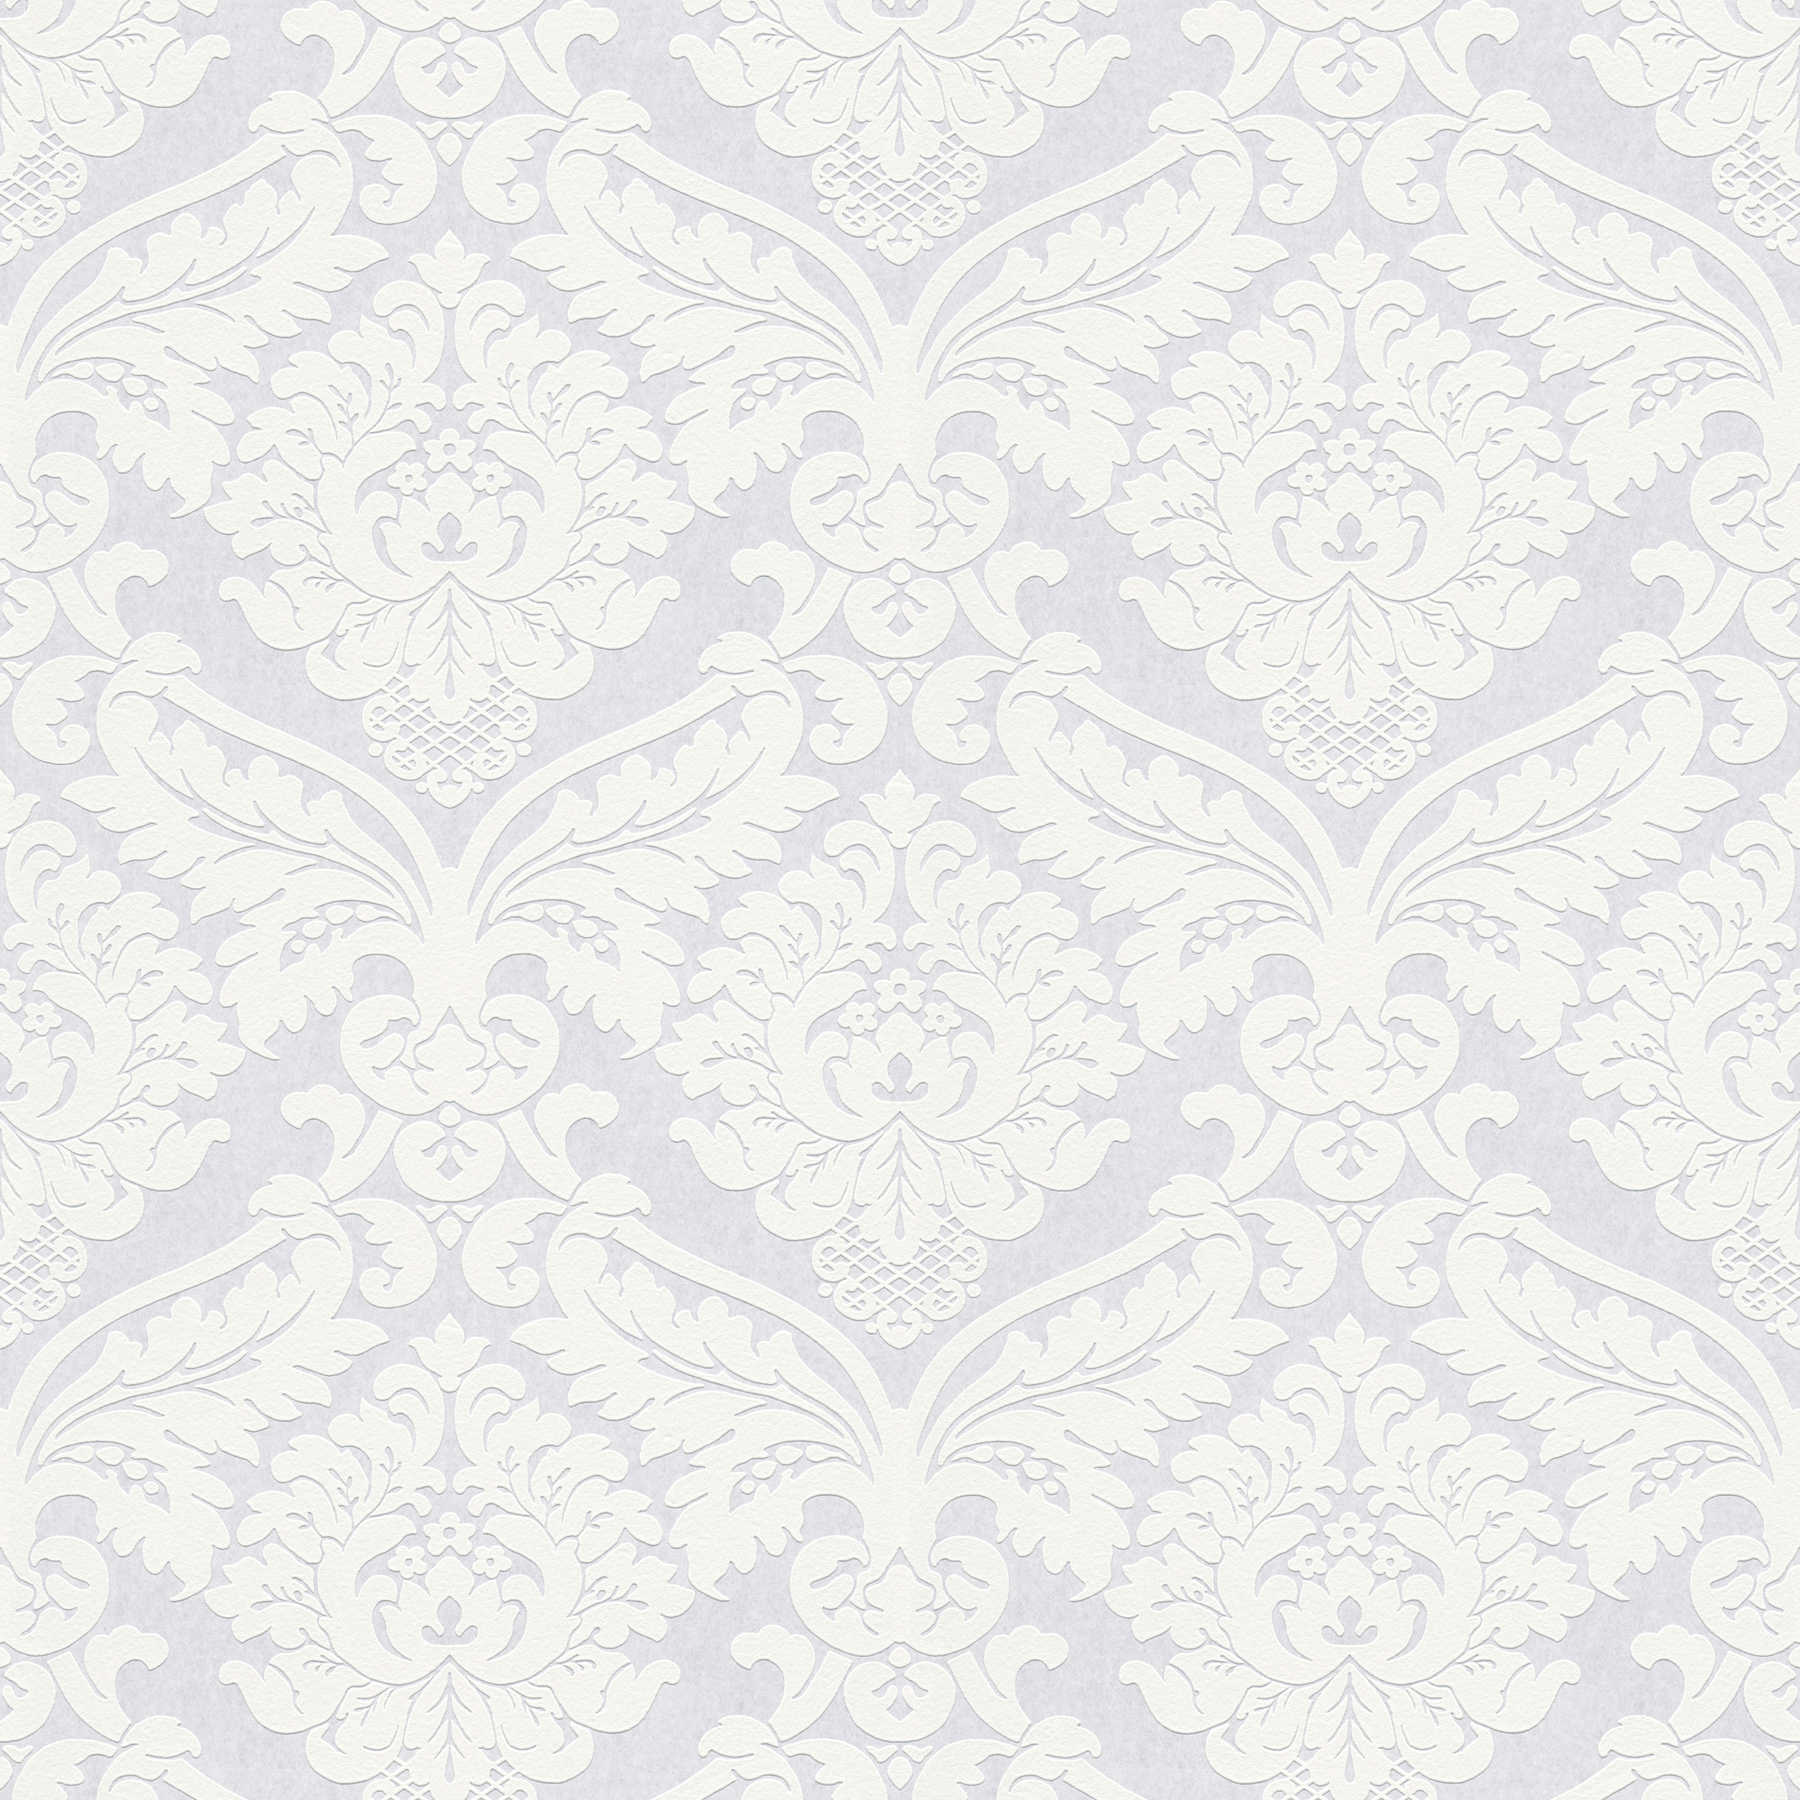 Ornament wallpaper baroque style and 3D effect - white
